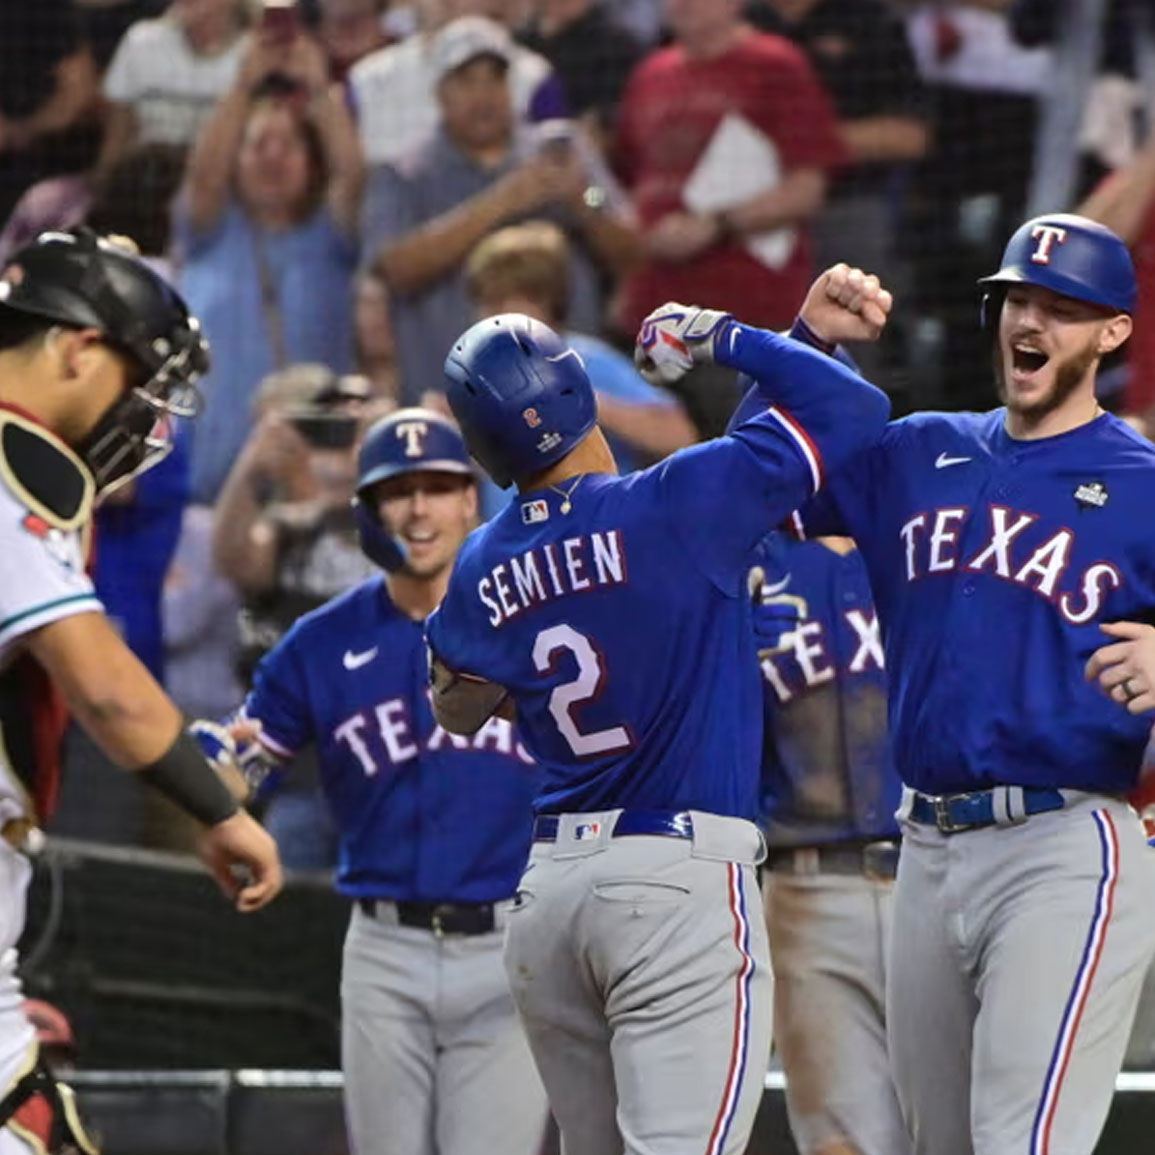 Texas Rangers clinch their inaugural World Series championship after 63 years of waiting 1